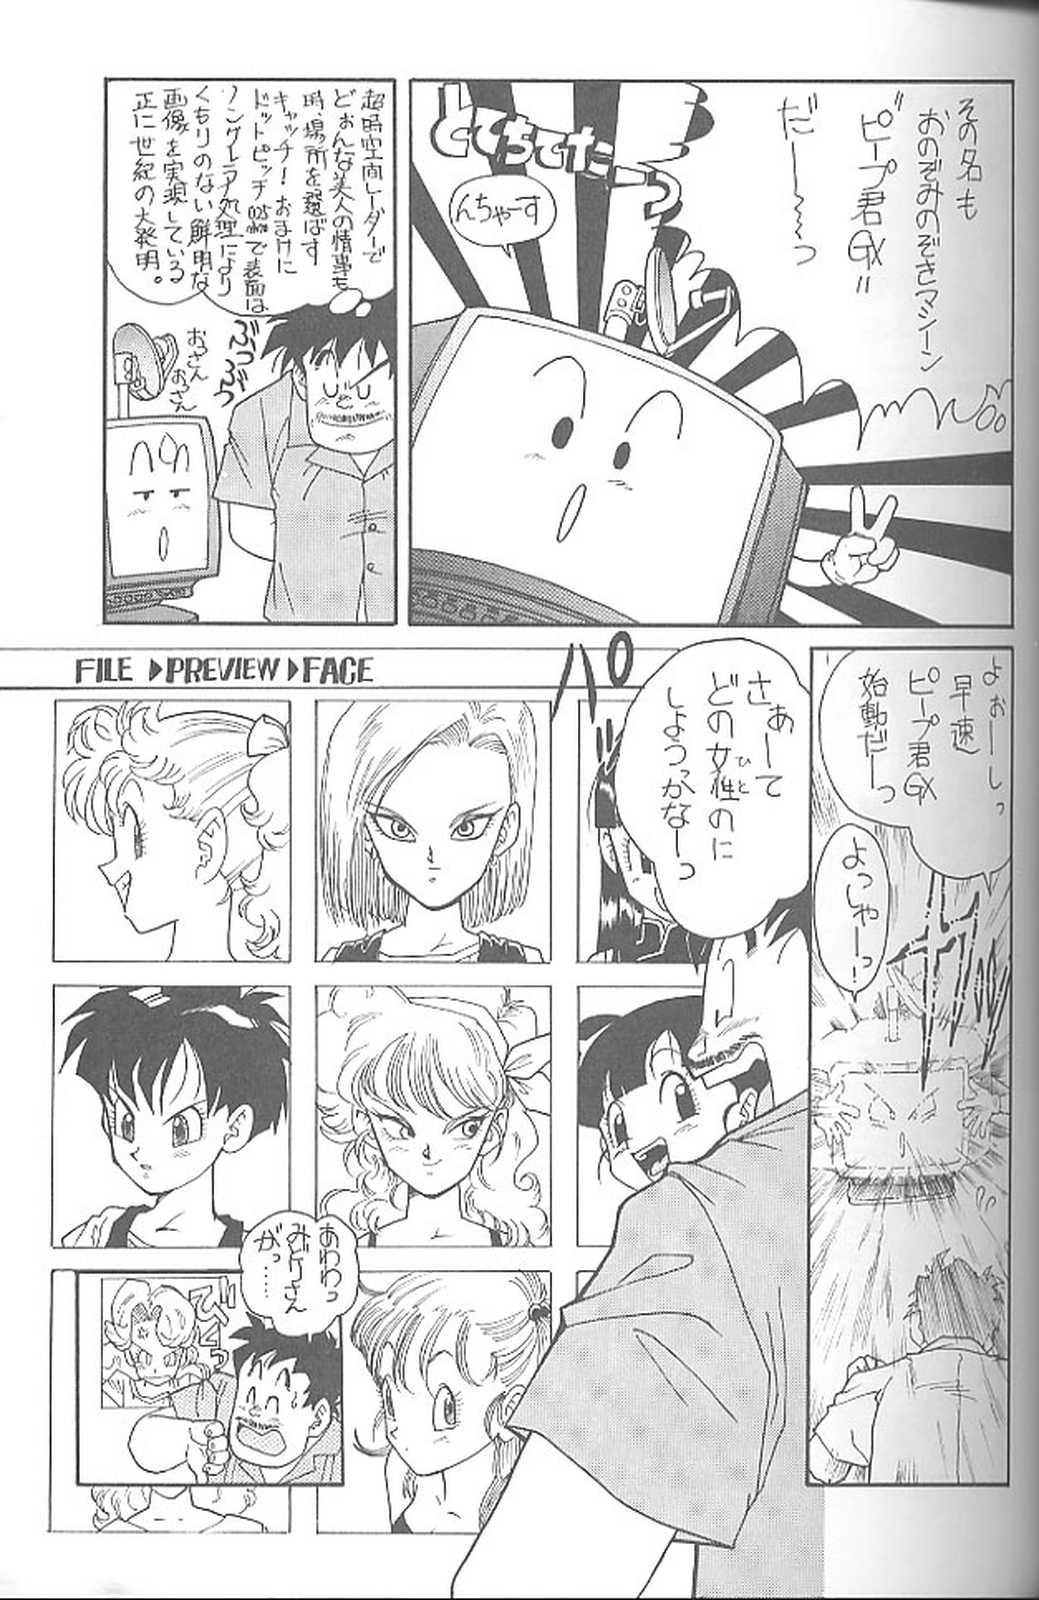 Teenpussy Haraharatokei vol.4 - Dragon ball z Slayers Dirty pair Ghost sweeper mikami World masterpiece theater Dr. slump Tico of the seven seas Hijab - Page 6